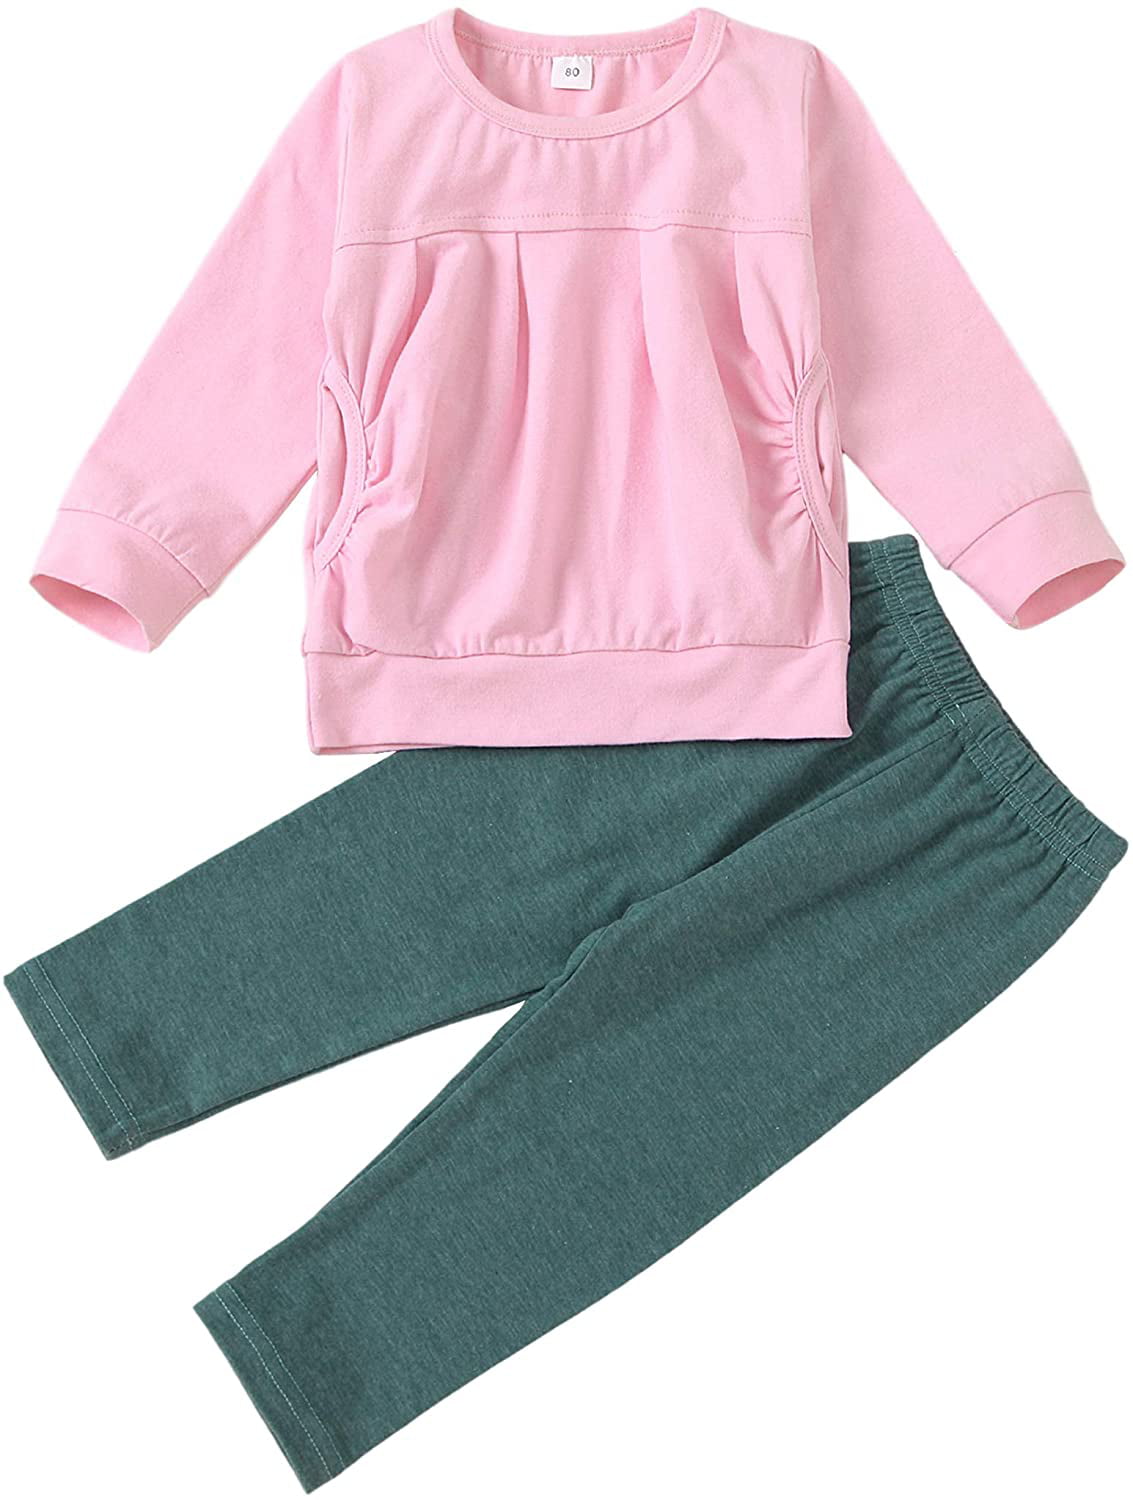 Toddler Girl Clothes Ruffle Flare Tunic Top Long Sleeve Shirt Pants and Headband Fall Winter Outfit Set